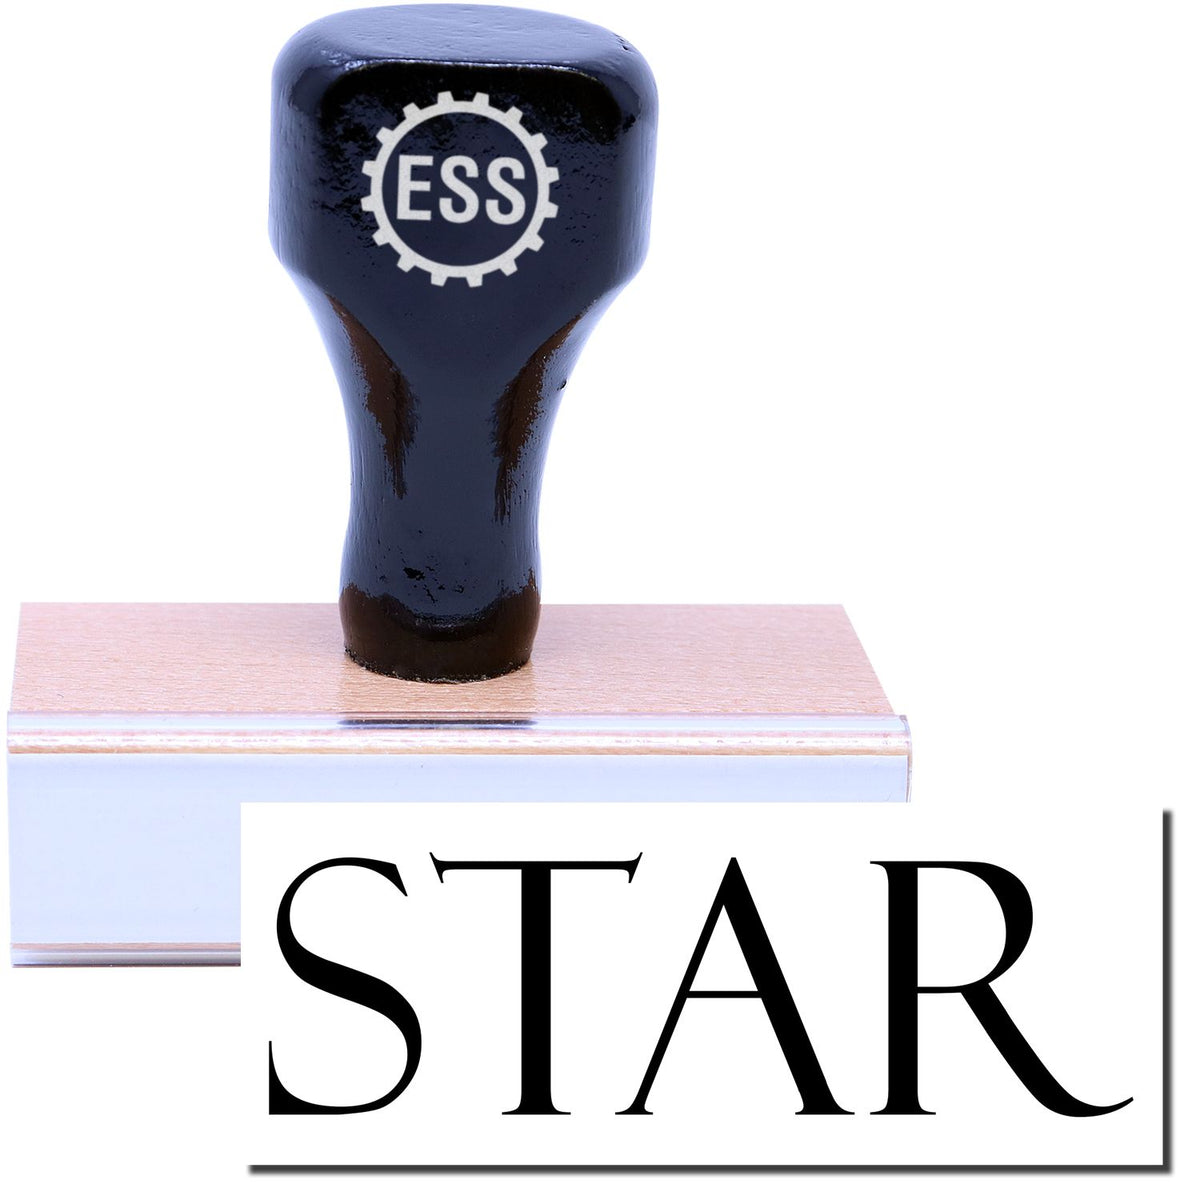 A stock office rubber stamp with a stamped image showing how the text &quot;STAR&quot; in a large font is displayed after stamping.